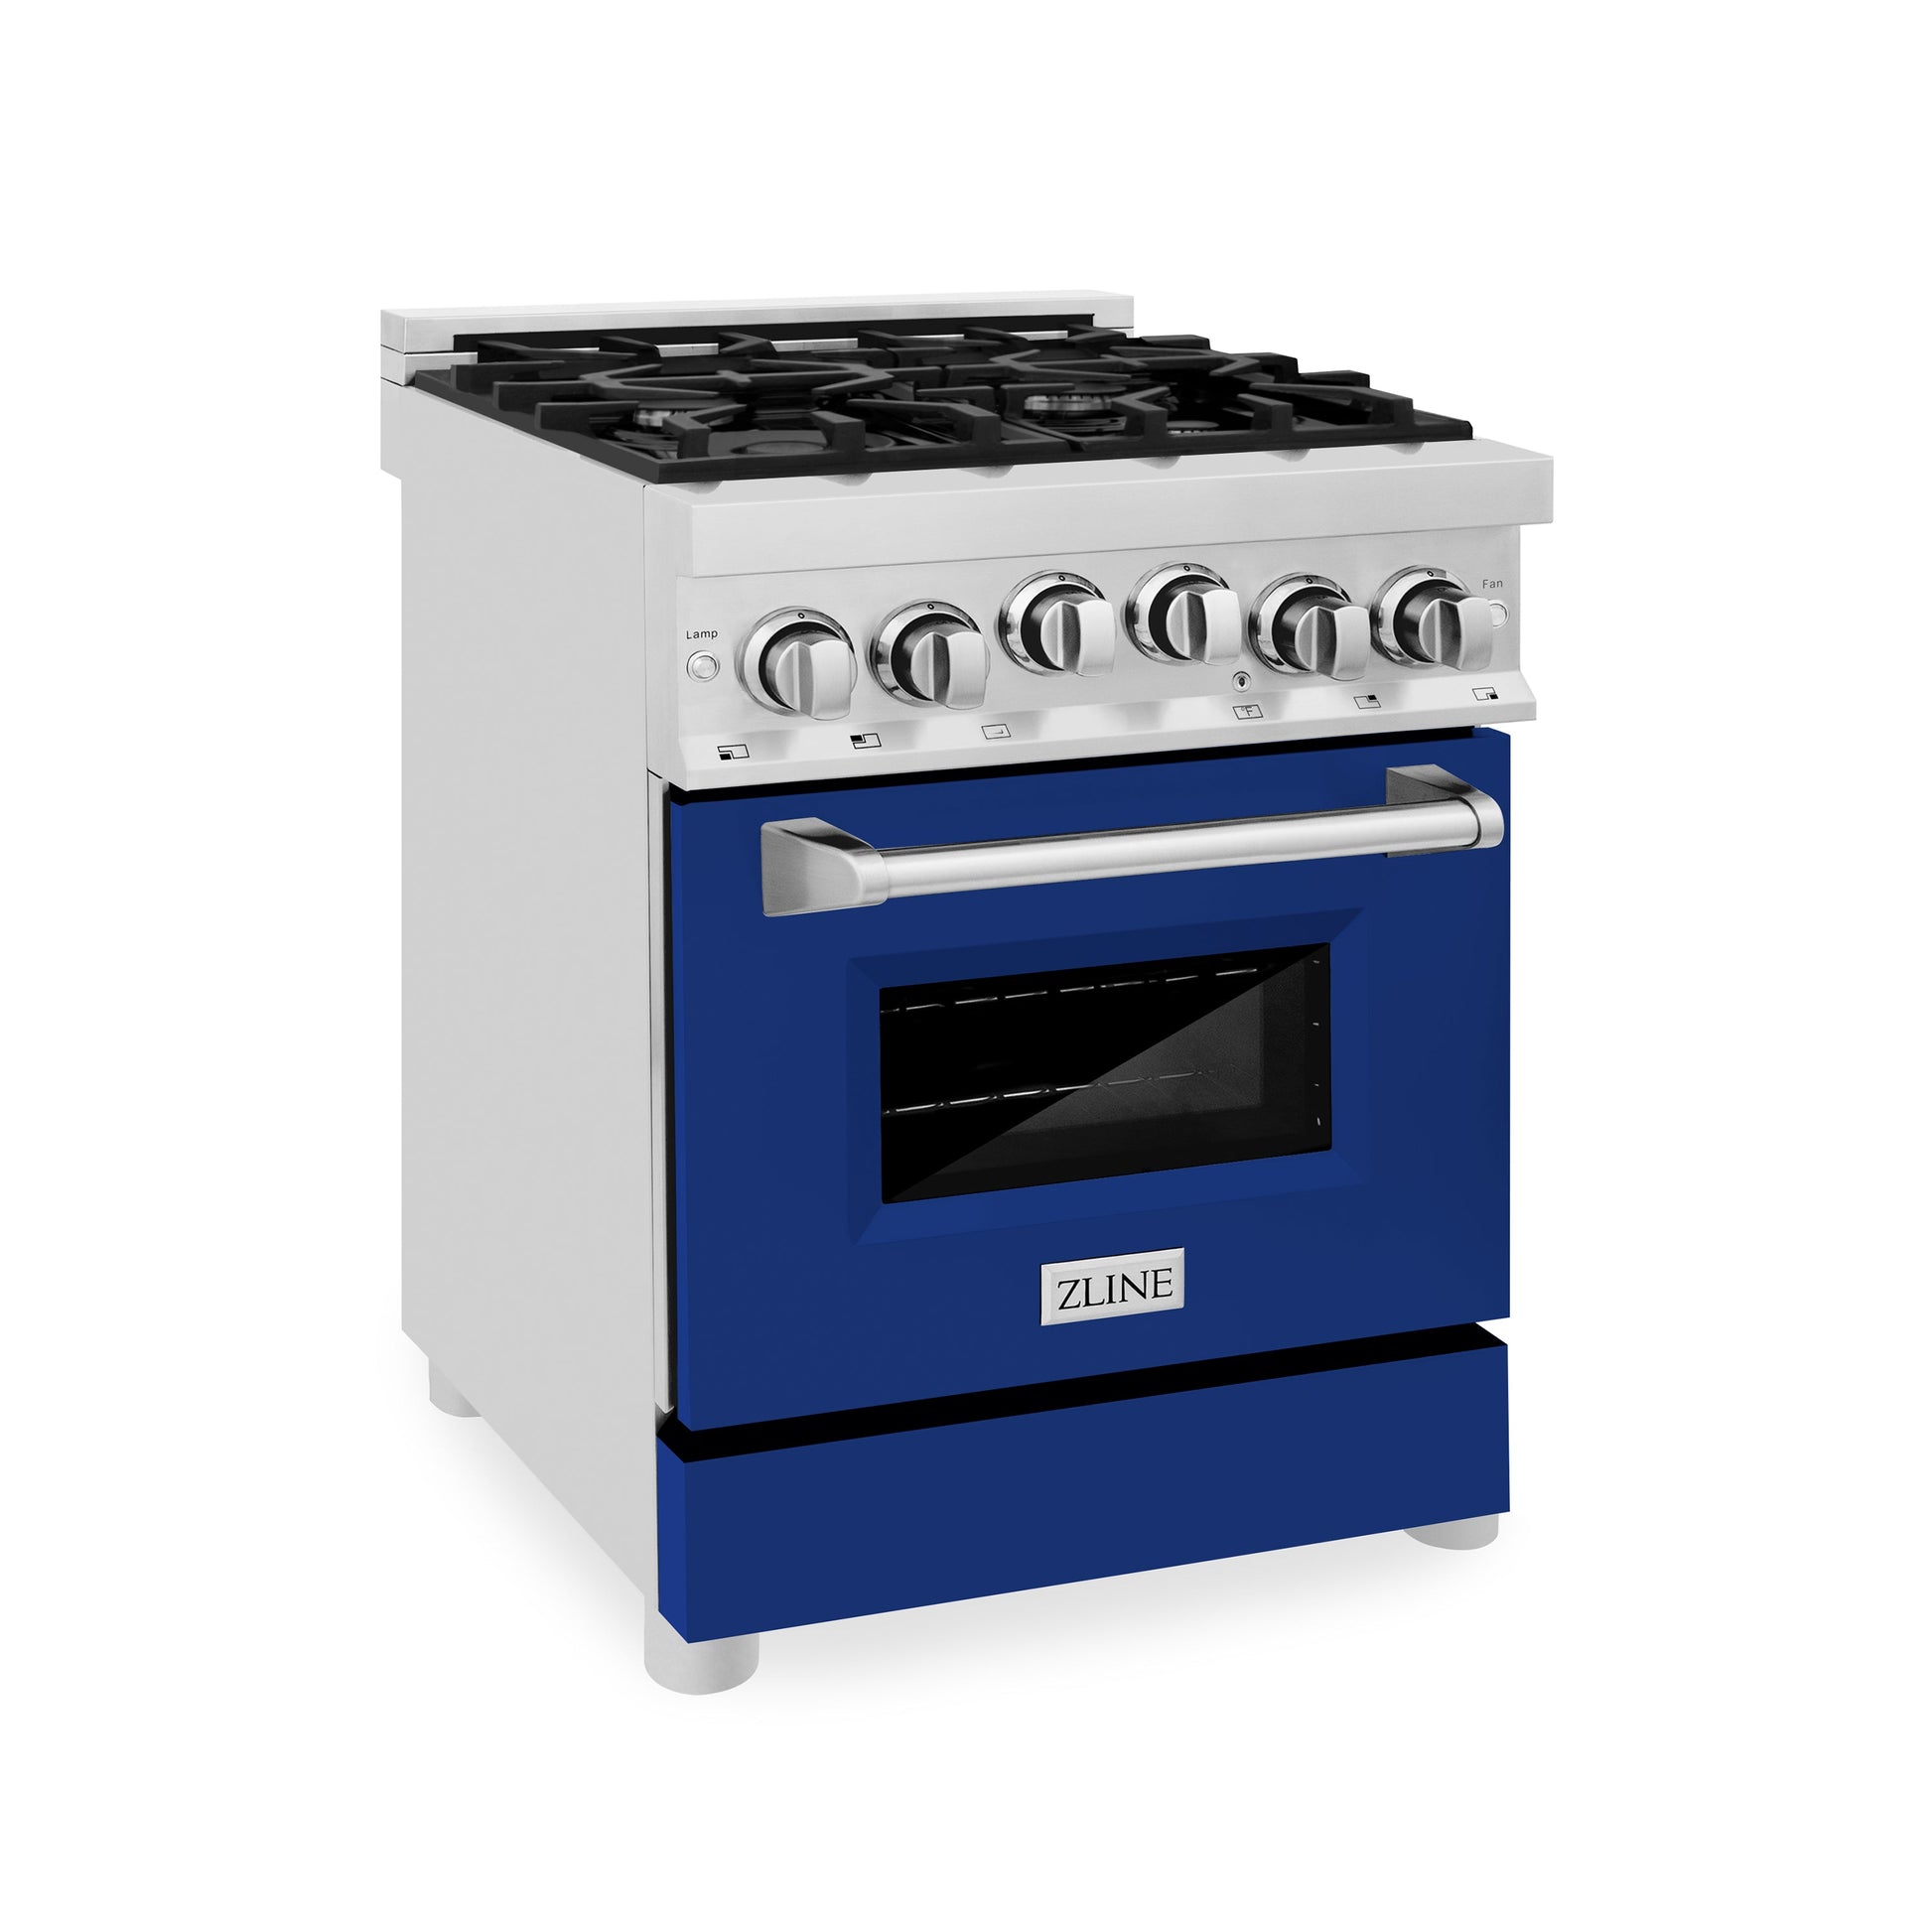 ZLINE 24" 2.8 cu. ft. Range with Gas Stove and Gas Oven in Stainless Steel and Blue Gloss Door